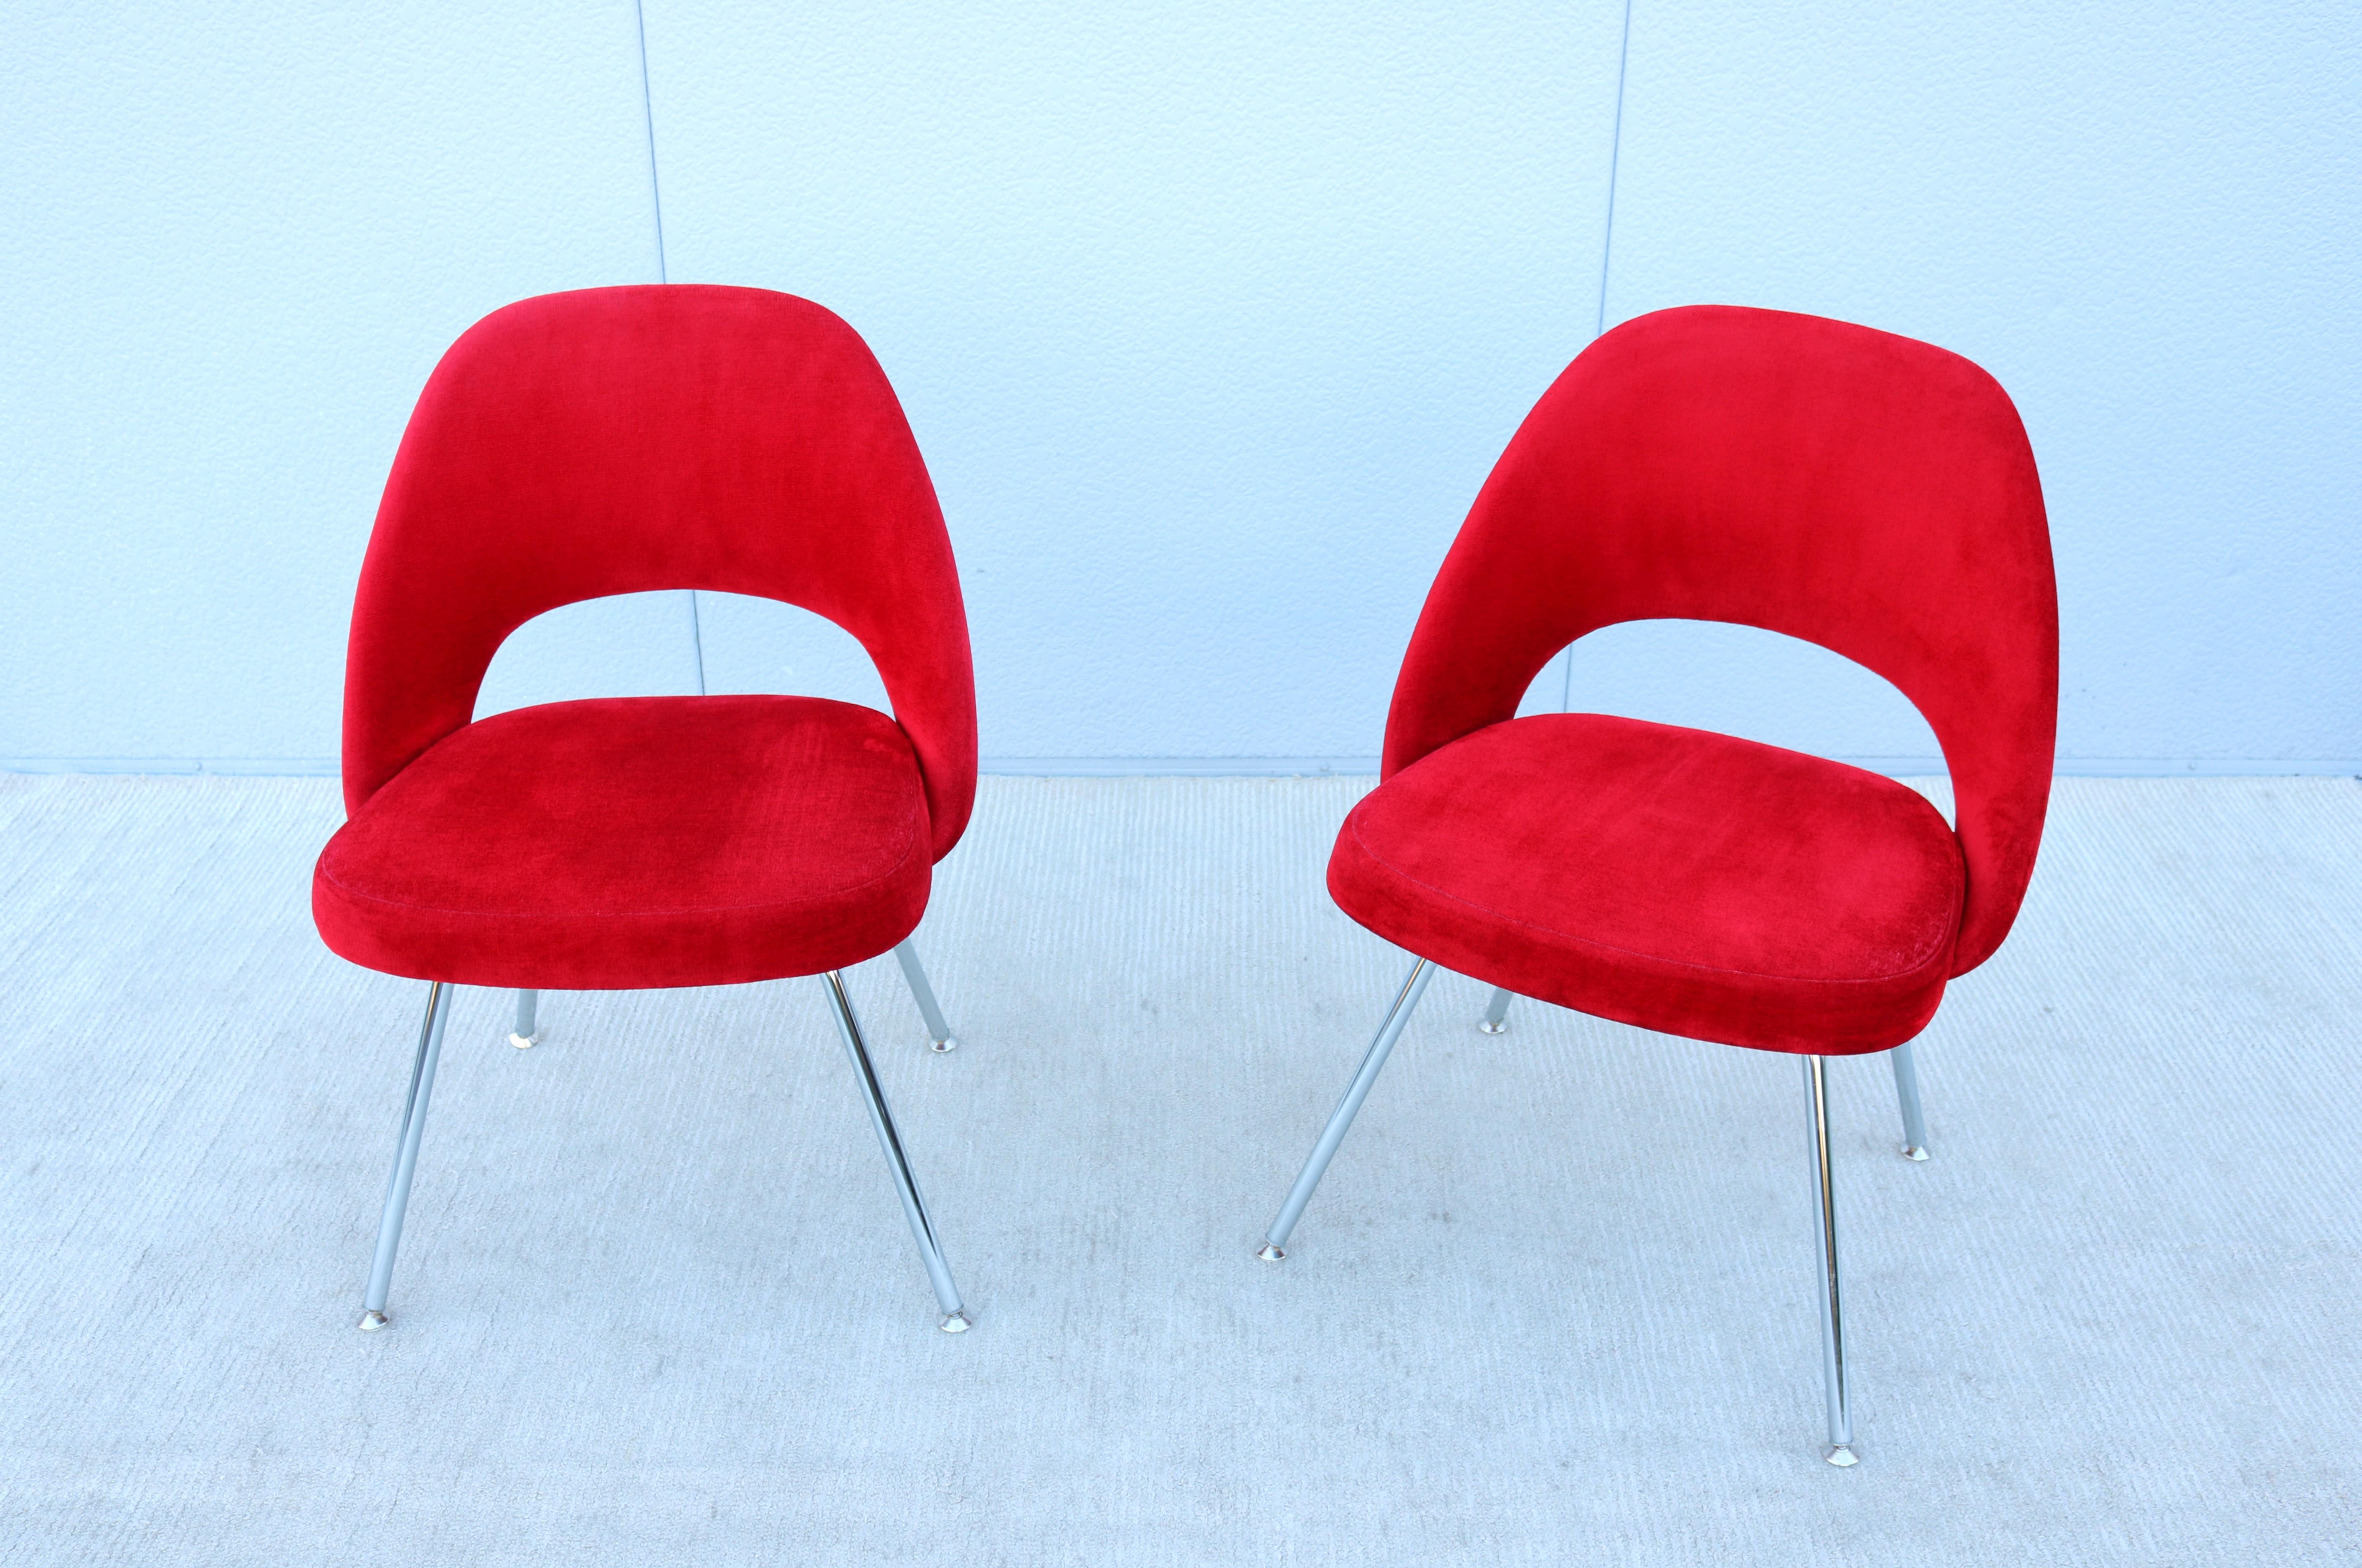 Contemporary Mid-Century Modern Eero Saarinen for Knoll Red Executive Armless Chairs - a Pair For Sale